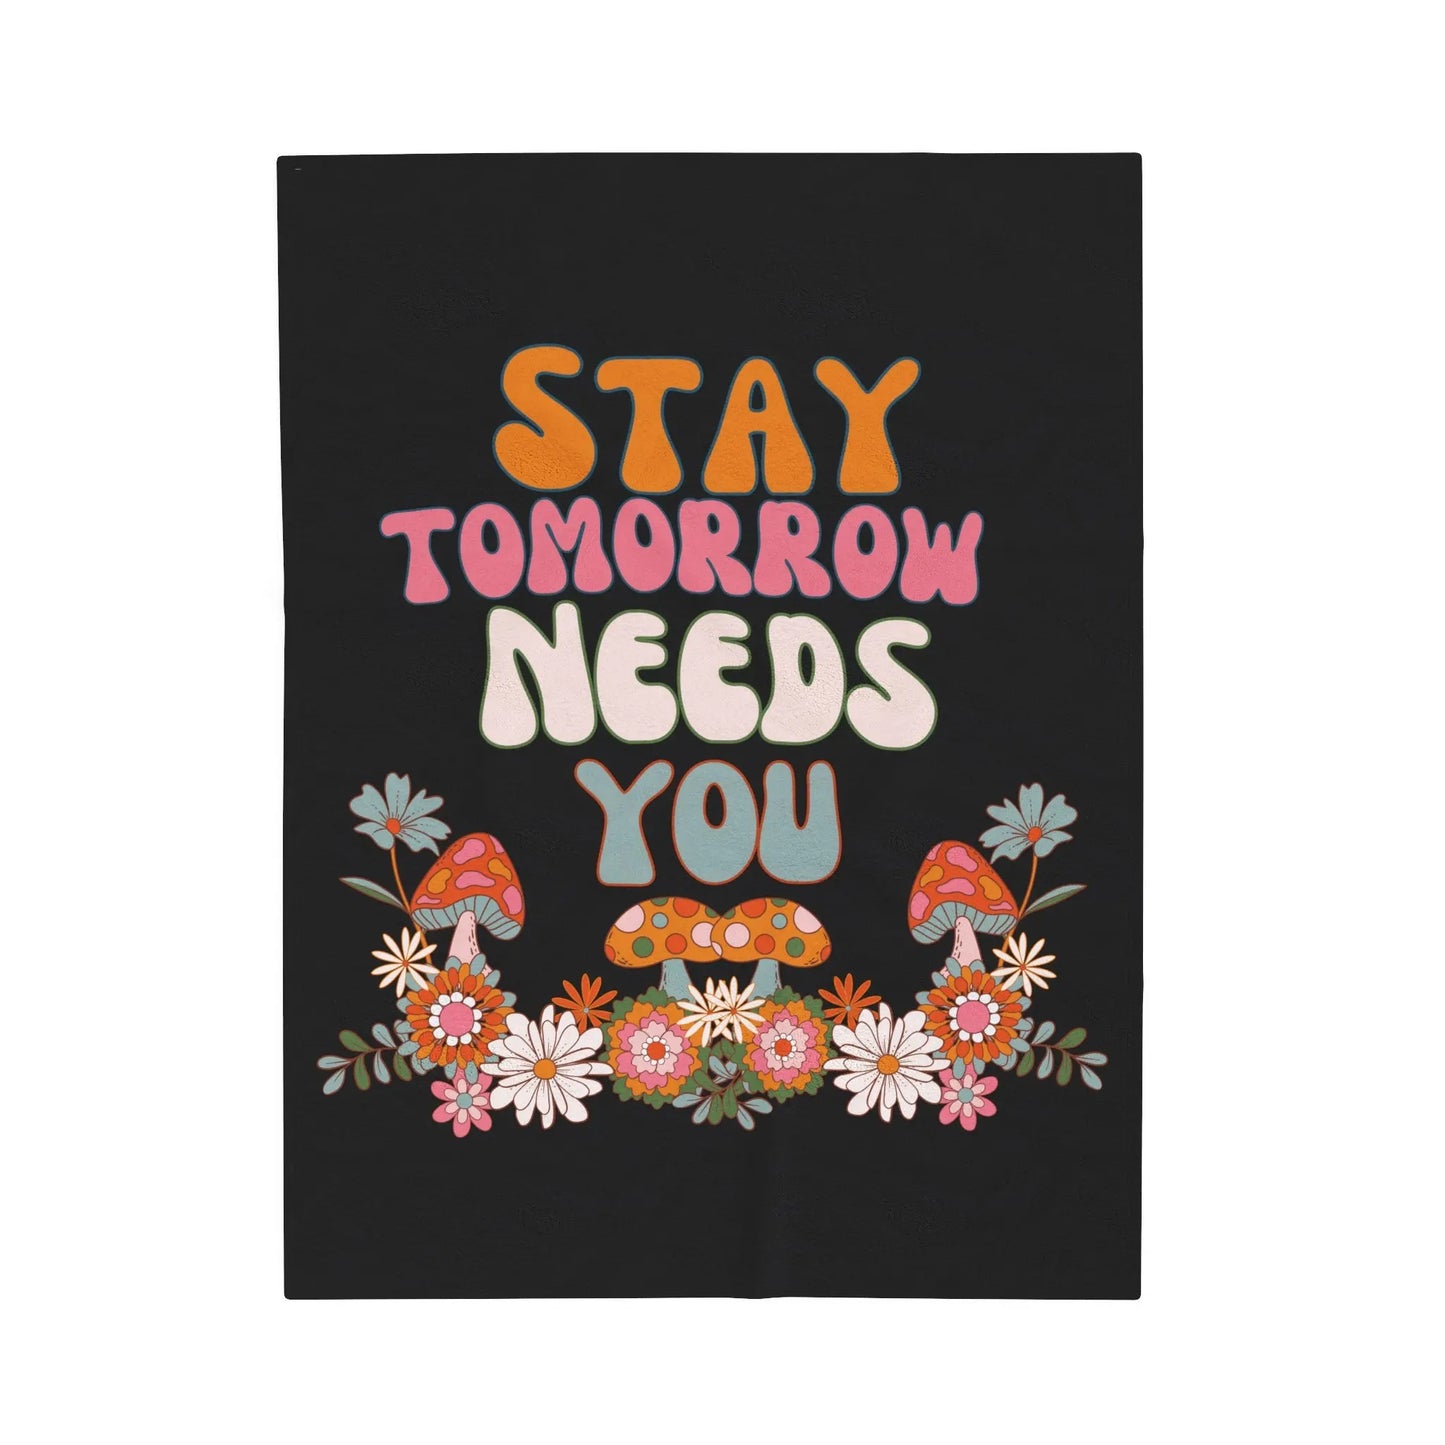 Hippie Retro Suicide Awareness Stay Tomorrow Needs You Lap Blanket - Perfect for Mother's Day and spring! Wrap in comfort and spread awareness. Shop now